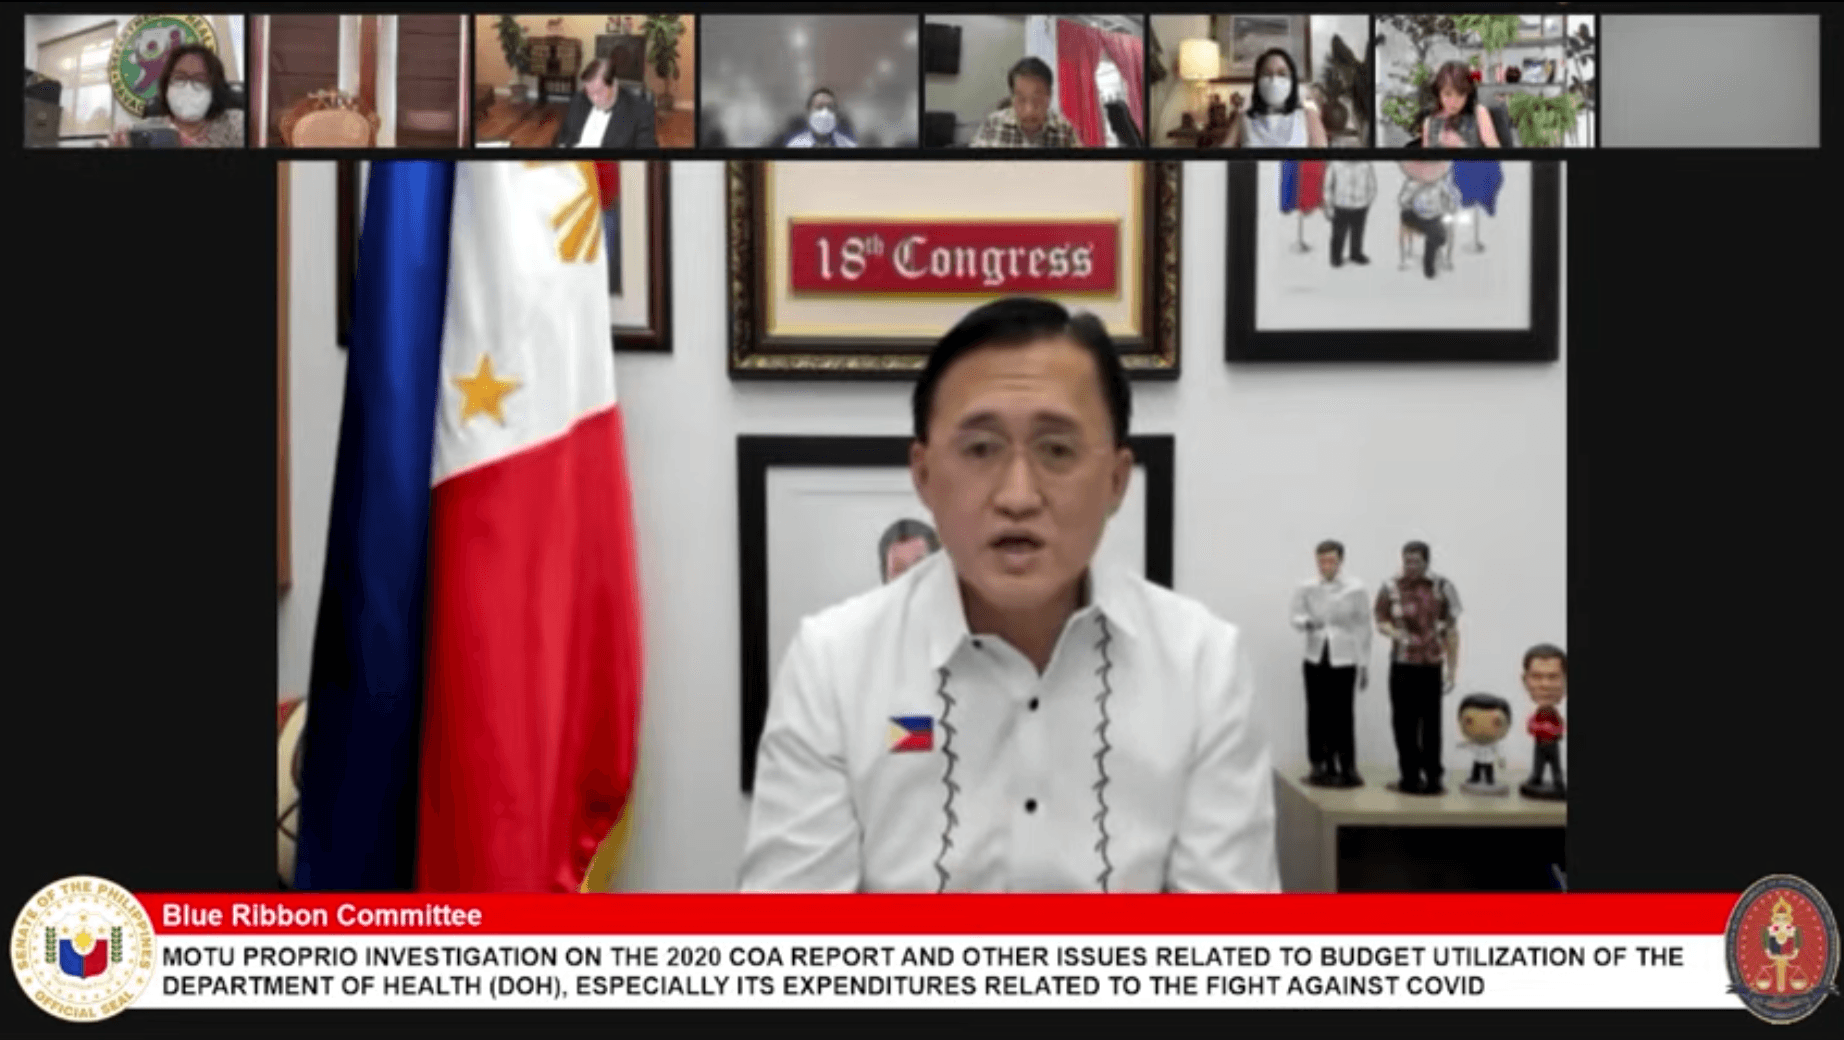 His link to Lao bared, Bong Go responds by asking Duque to resign